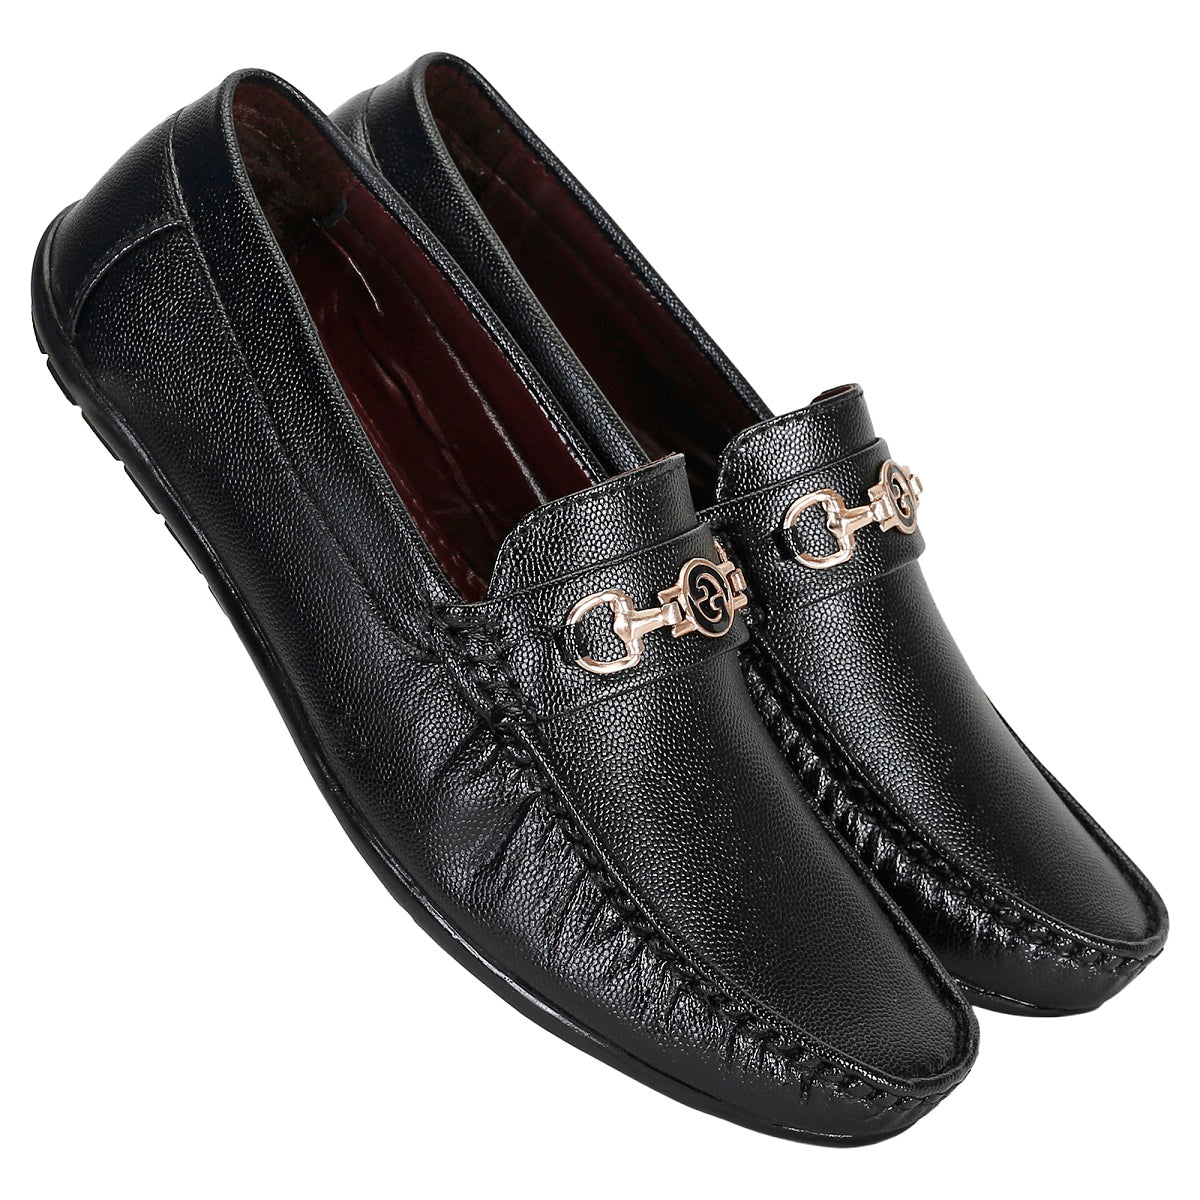 Fashionable Loafers Shoes For Men